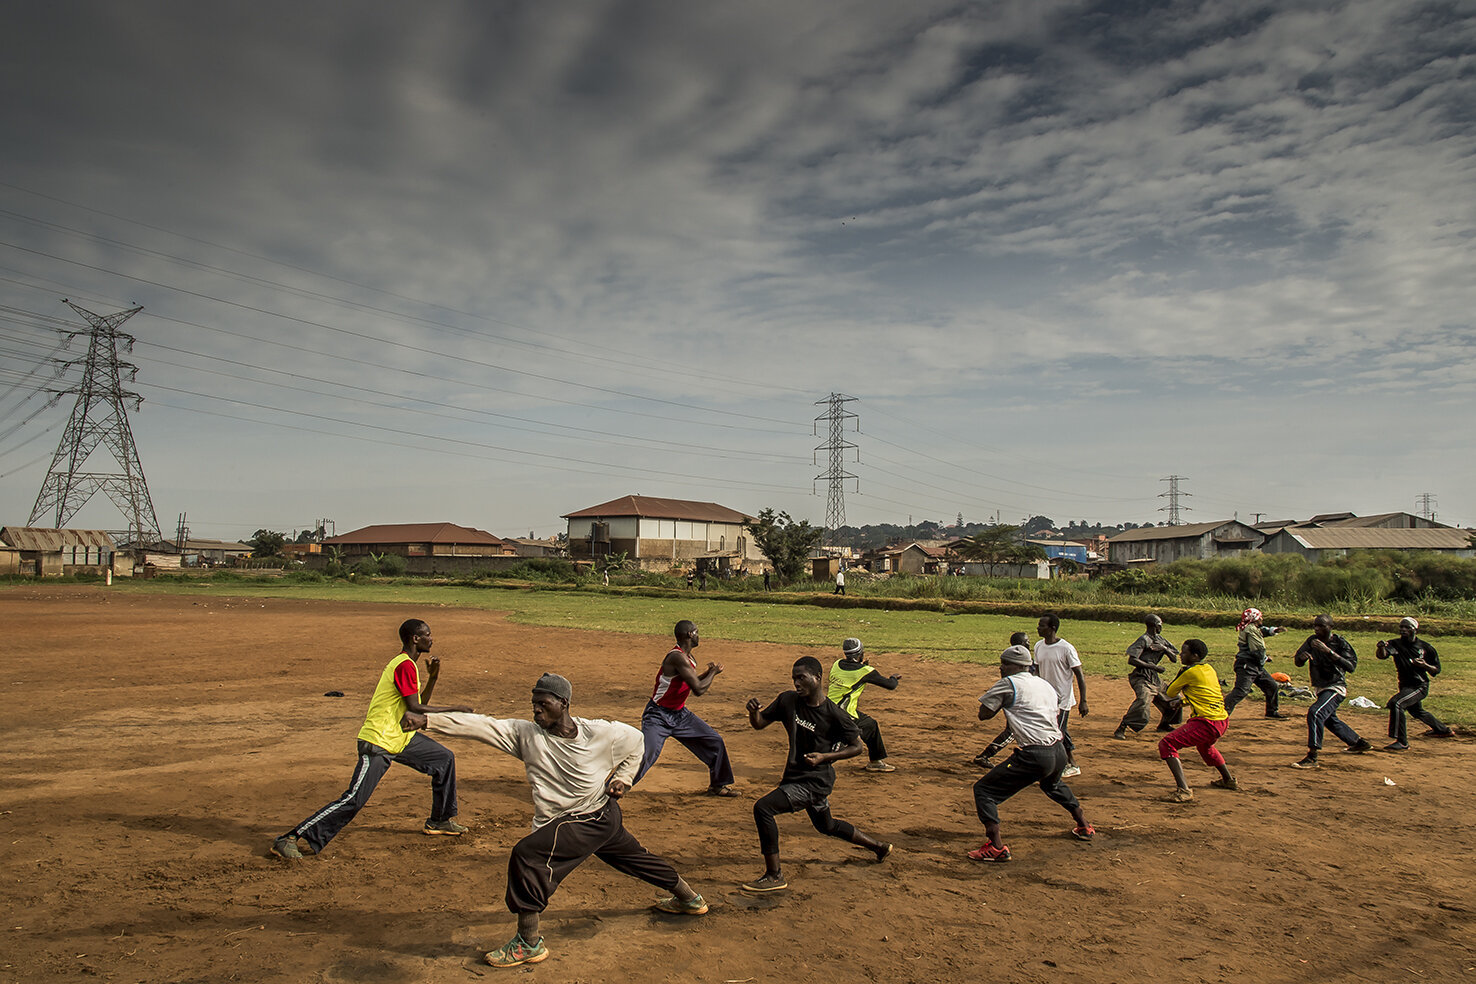  Half-brother of Isaac Nabwana, the director/producer of Wakaliwood, Robert Kizito (white teeshirt walking between the ranks) gives his Kung Fu class every Sunday on a football pitch in the out of the way area of Natete. Amongst the assistance, three